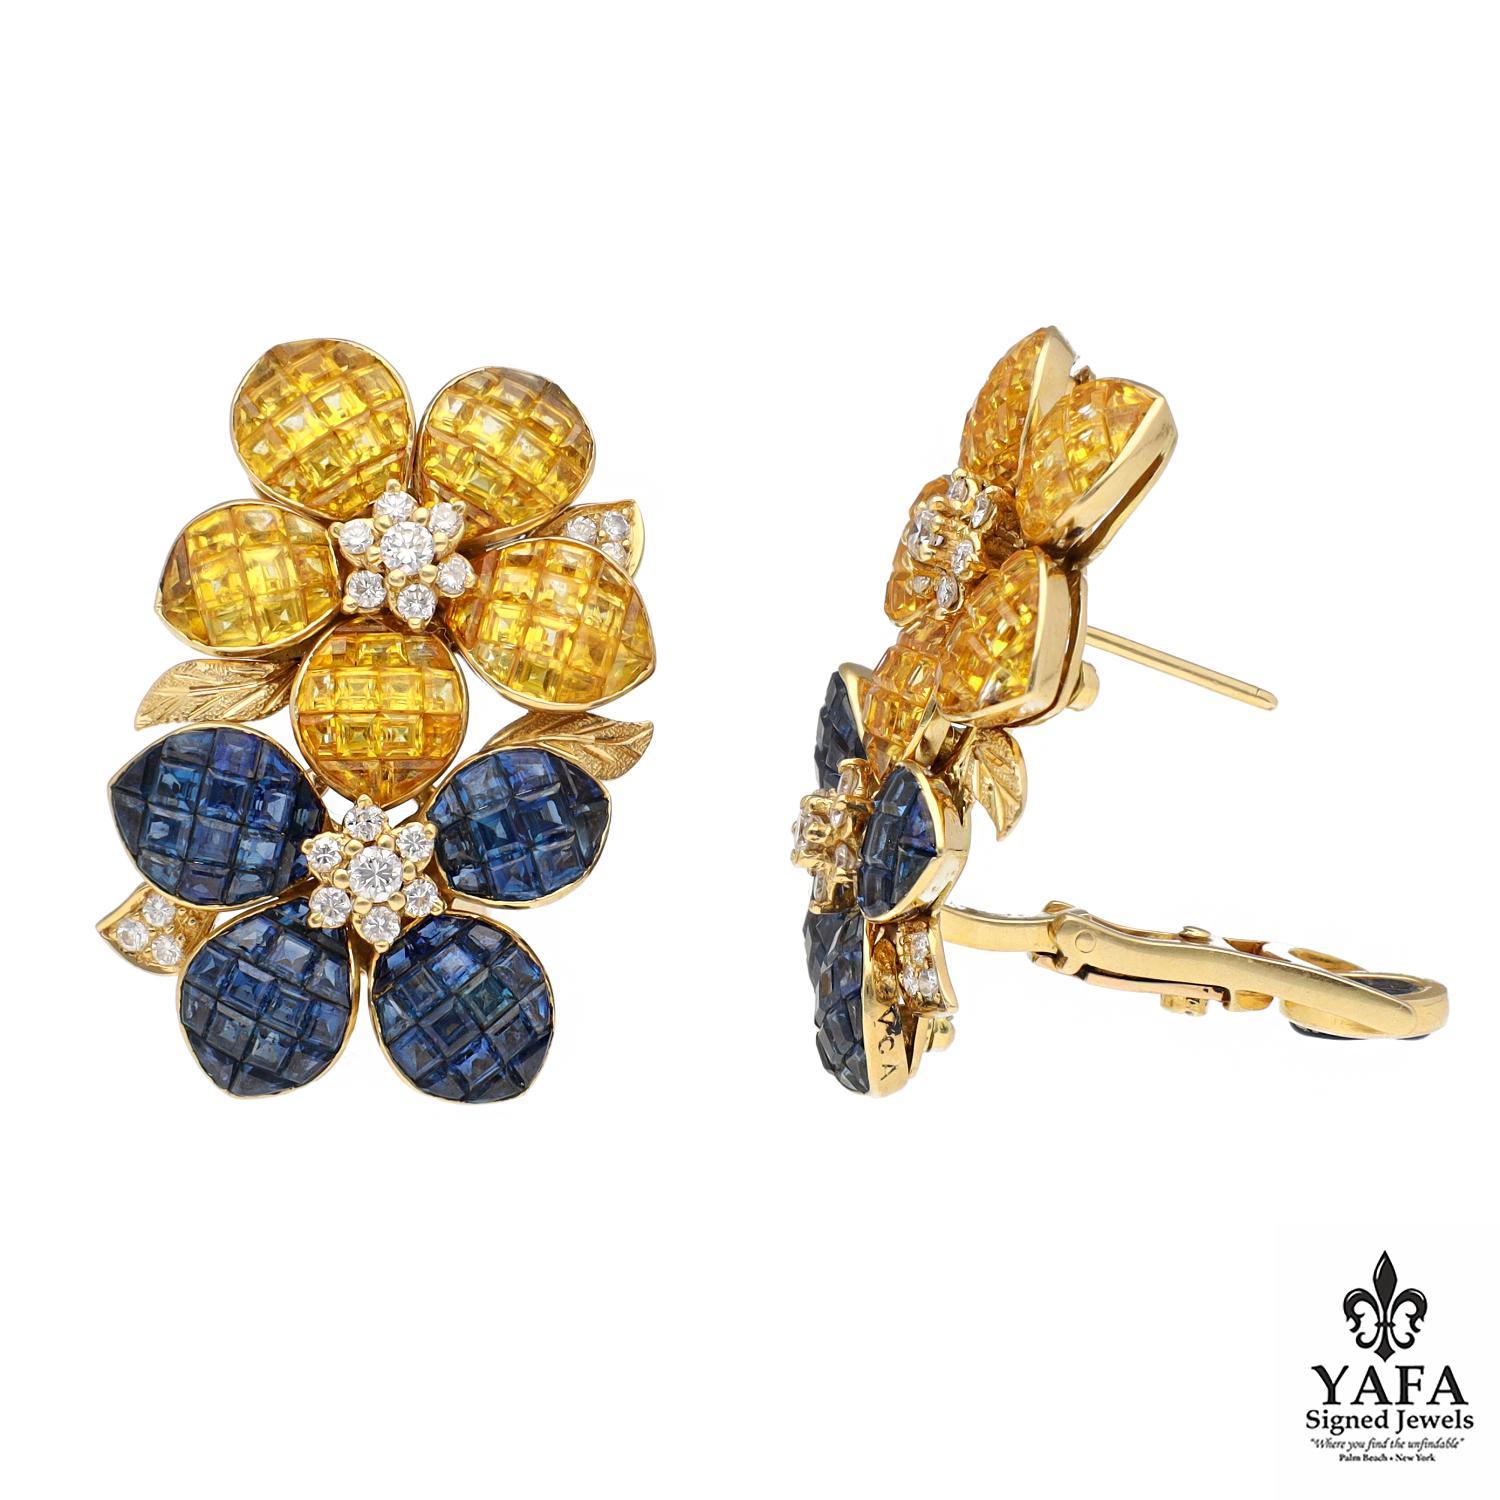 These Three-Dimensional Flower Ear Clips provide an enchanting spectacle in perpetual bloom. Van Cleef & Arpels Captures This Beautifully with Their Mystery Setting Featuring Blue and Yellow Sapphires and Diamonds.